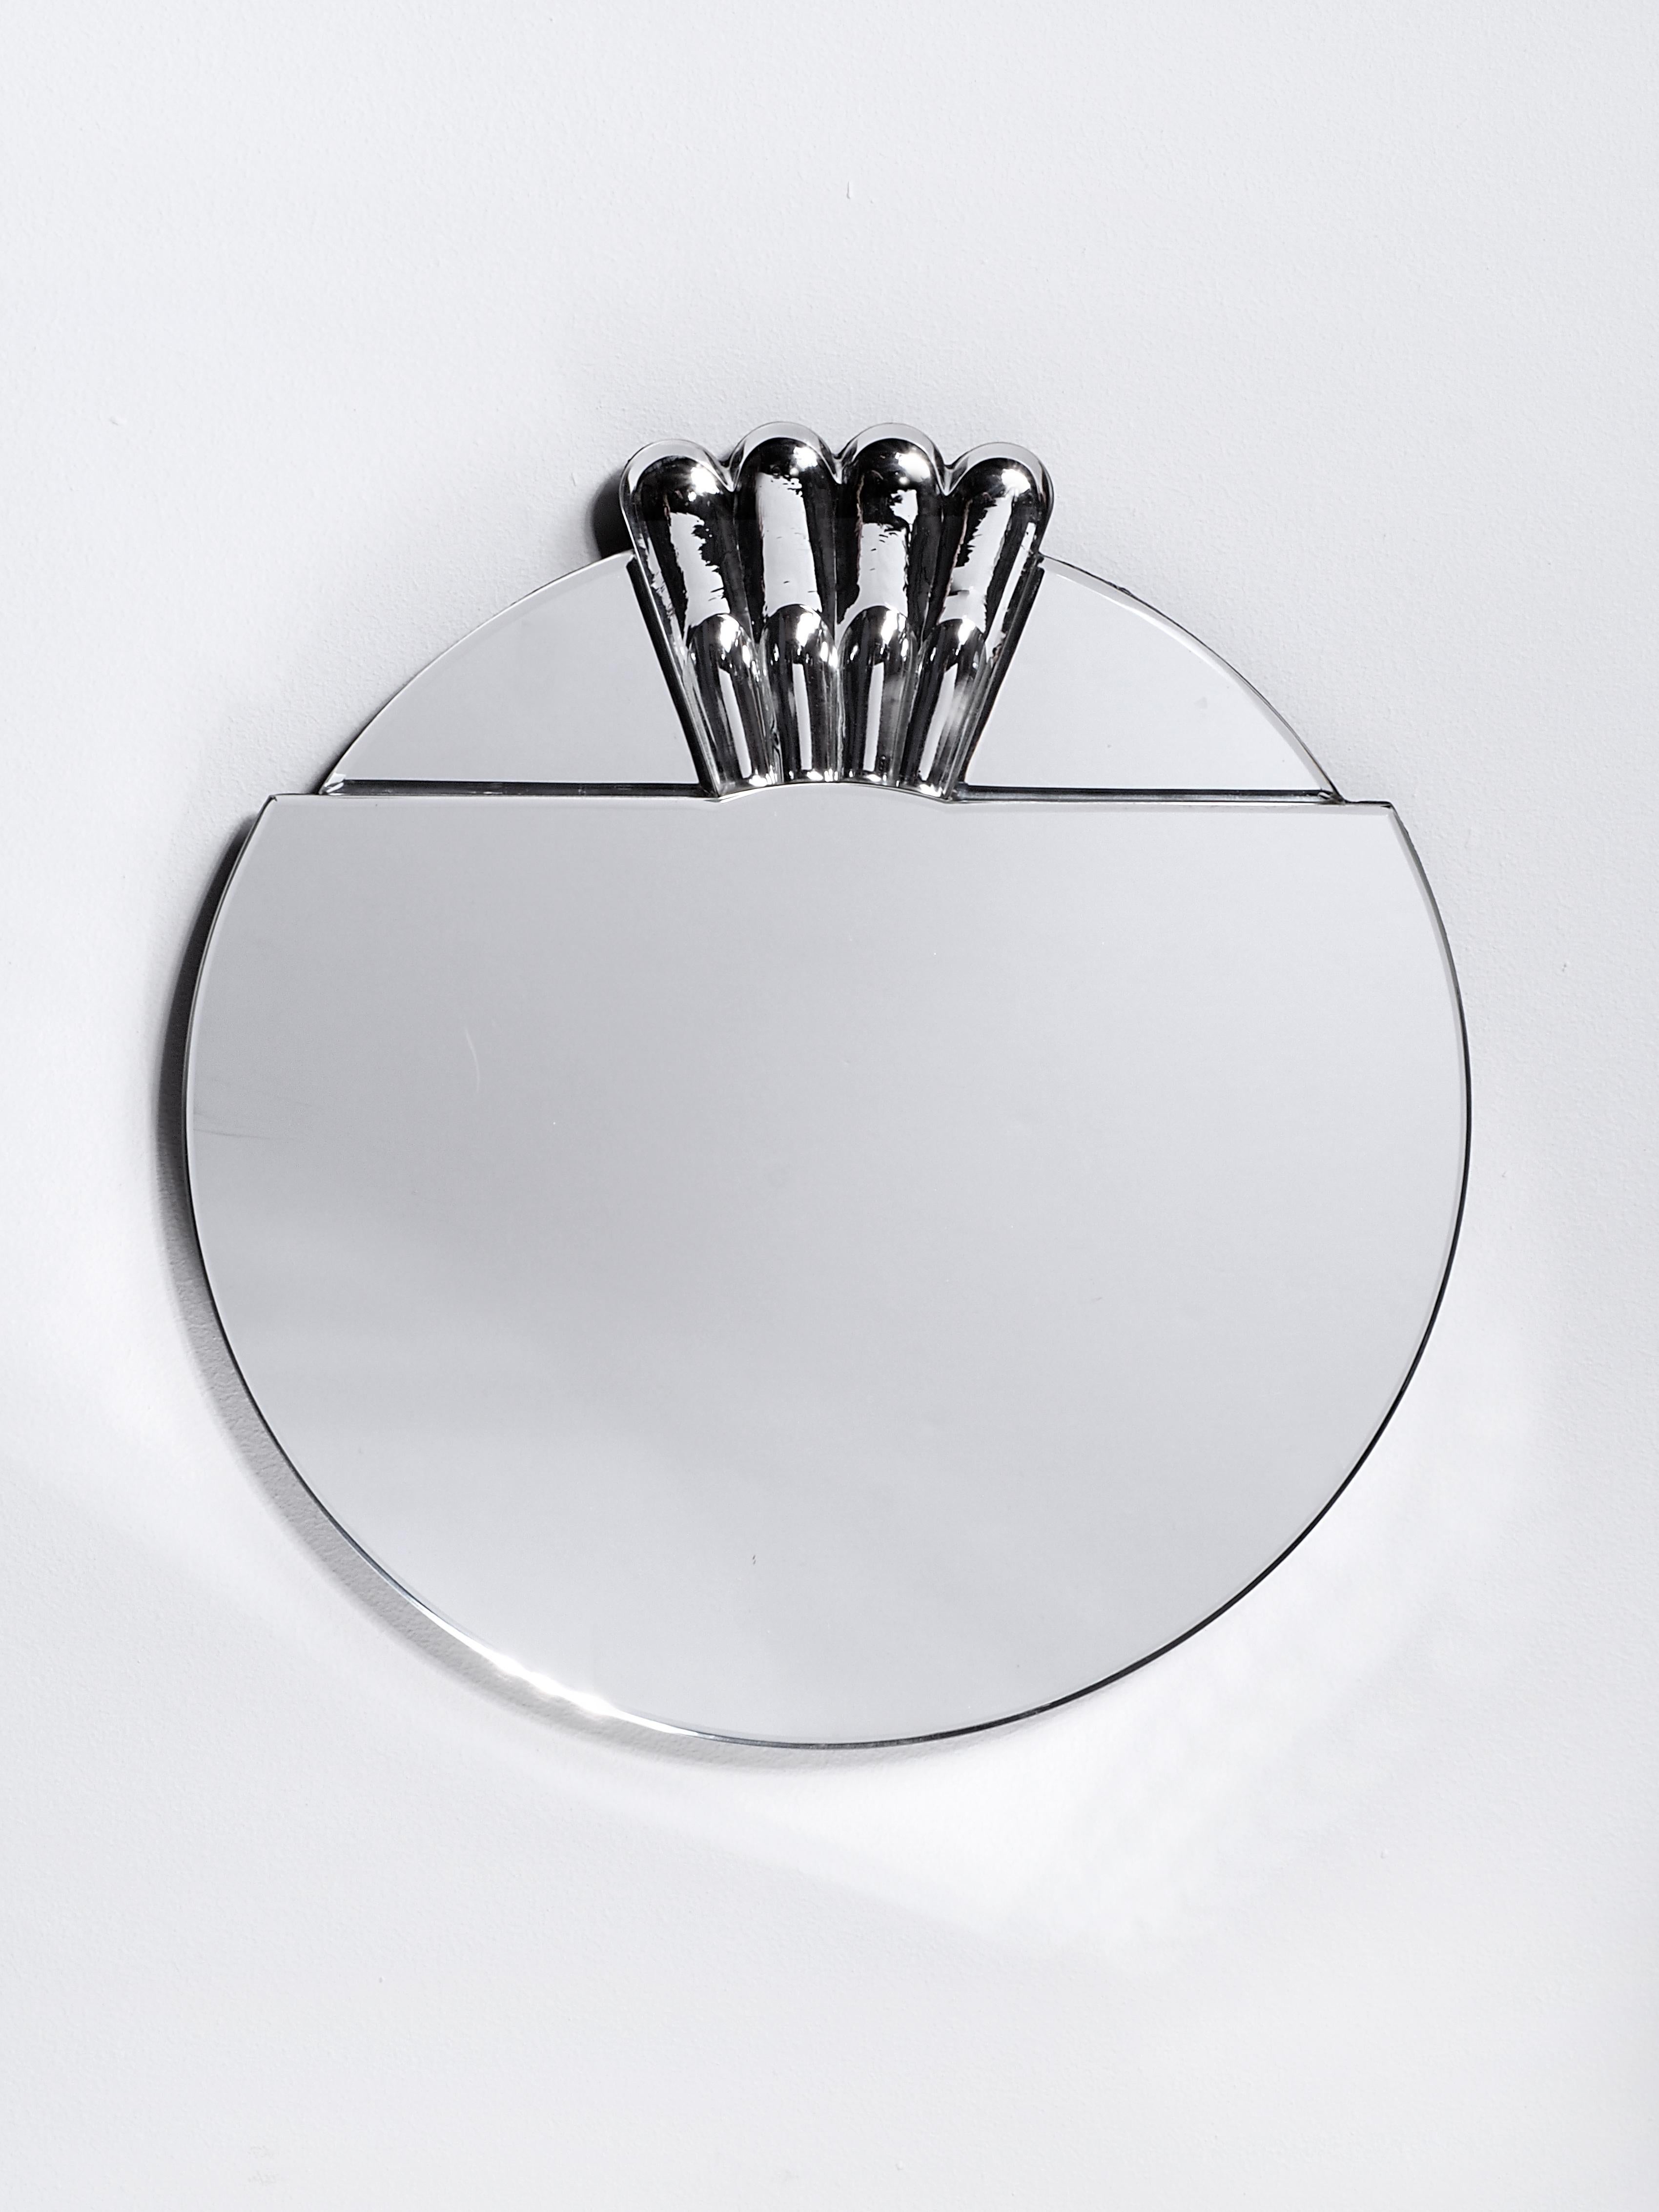 Large Scena Elemento Tre Murano mirror by Nikolai Kotlarczyk.
Dimensions: D 3 x W 65 x H 67 cm. 
Materials: silvered carved glass, dark grey wood back.
Also available in other sizes and dimensions.


Elemento is a series of solid glass mirrors